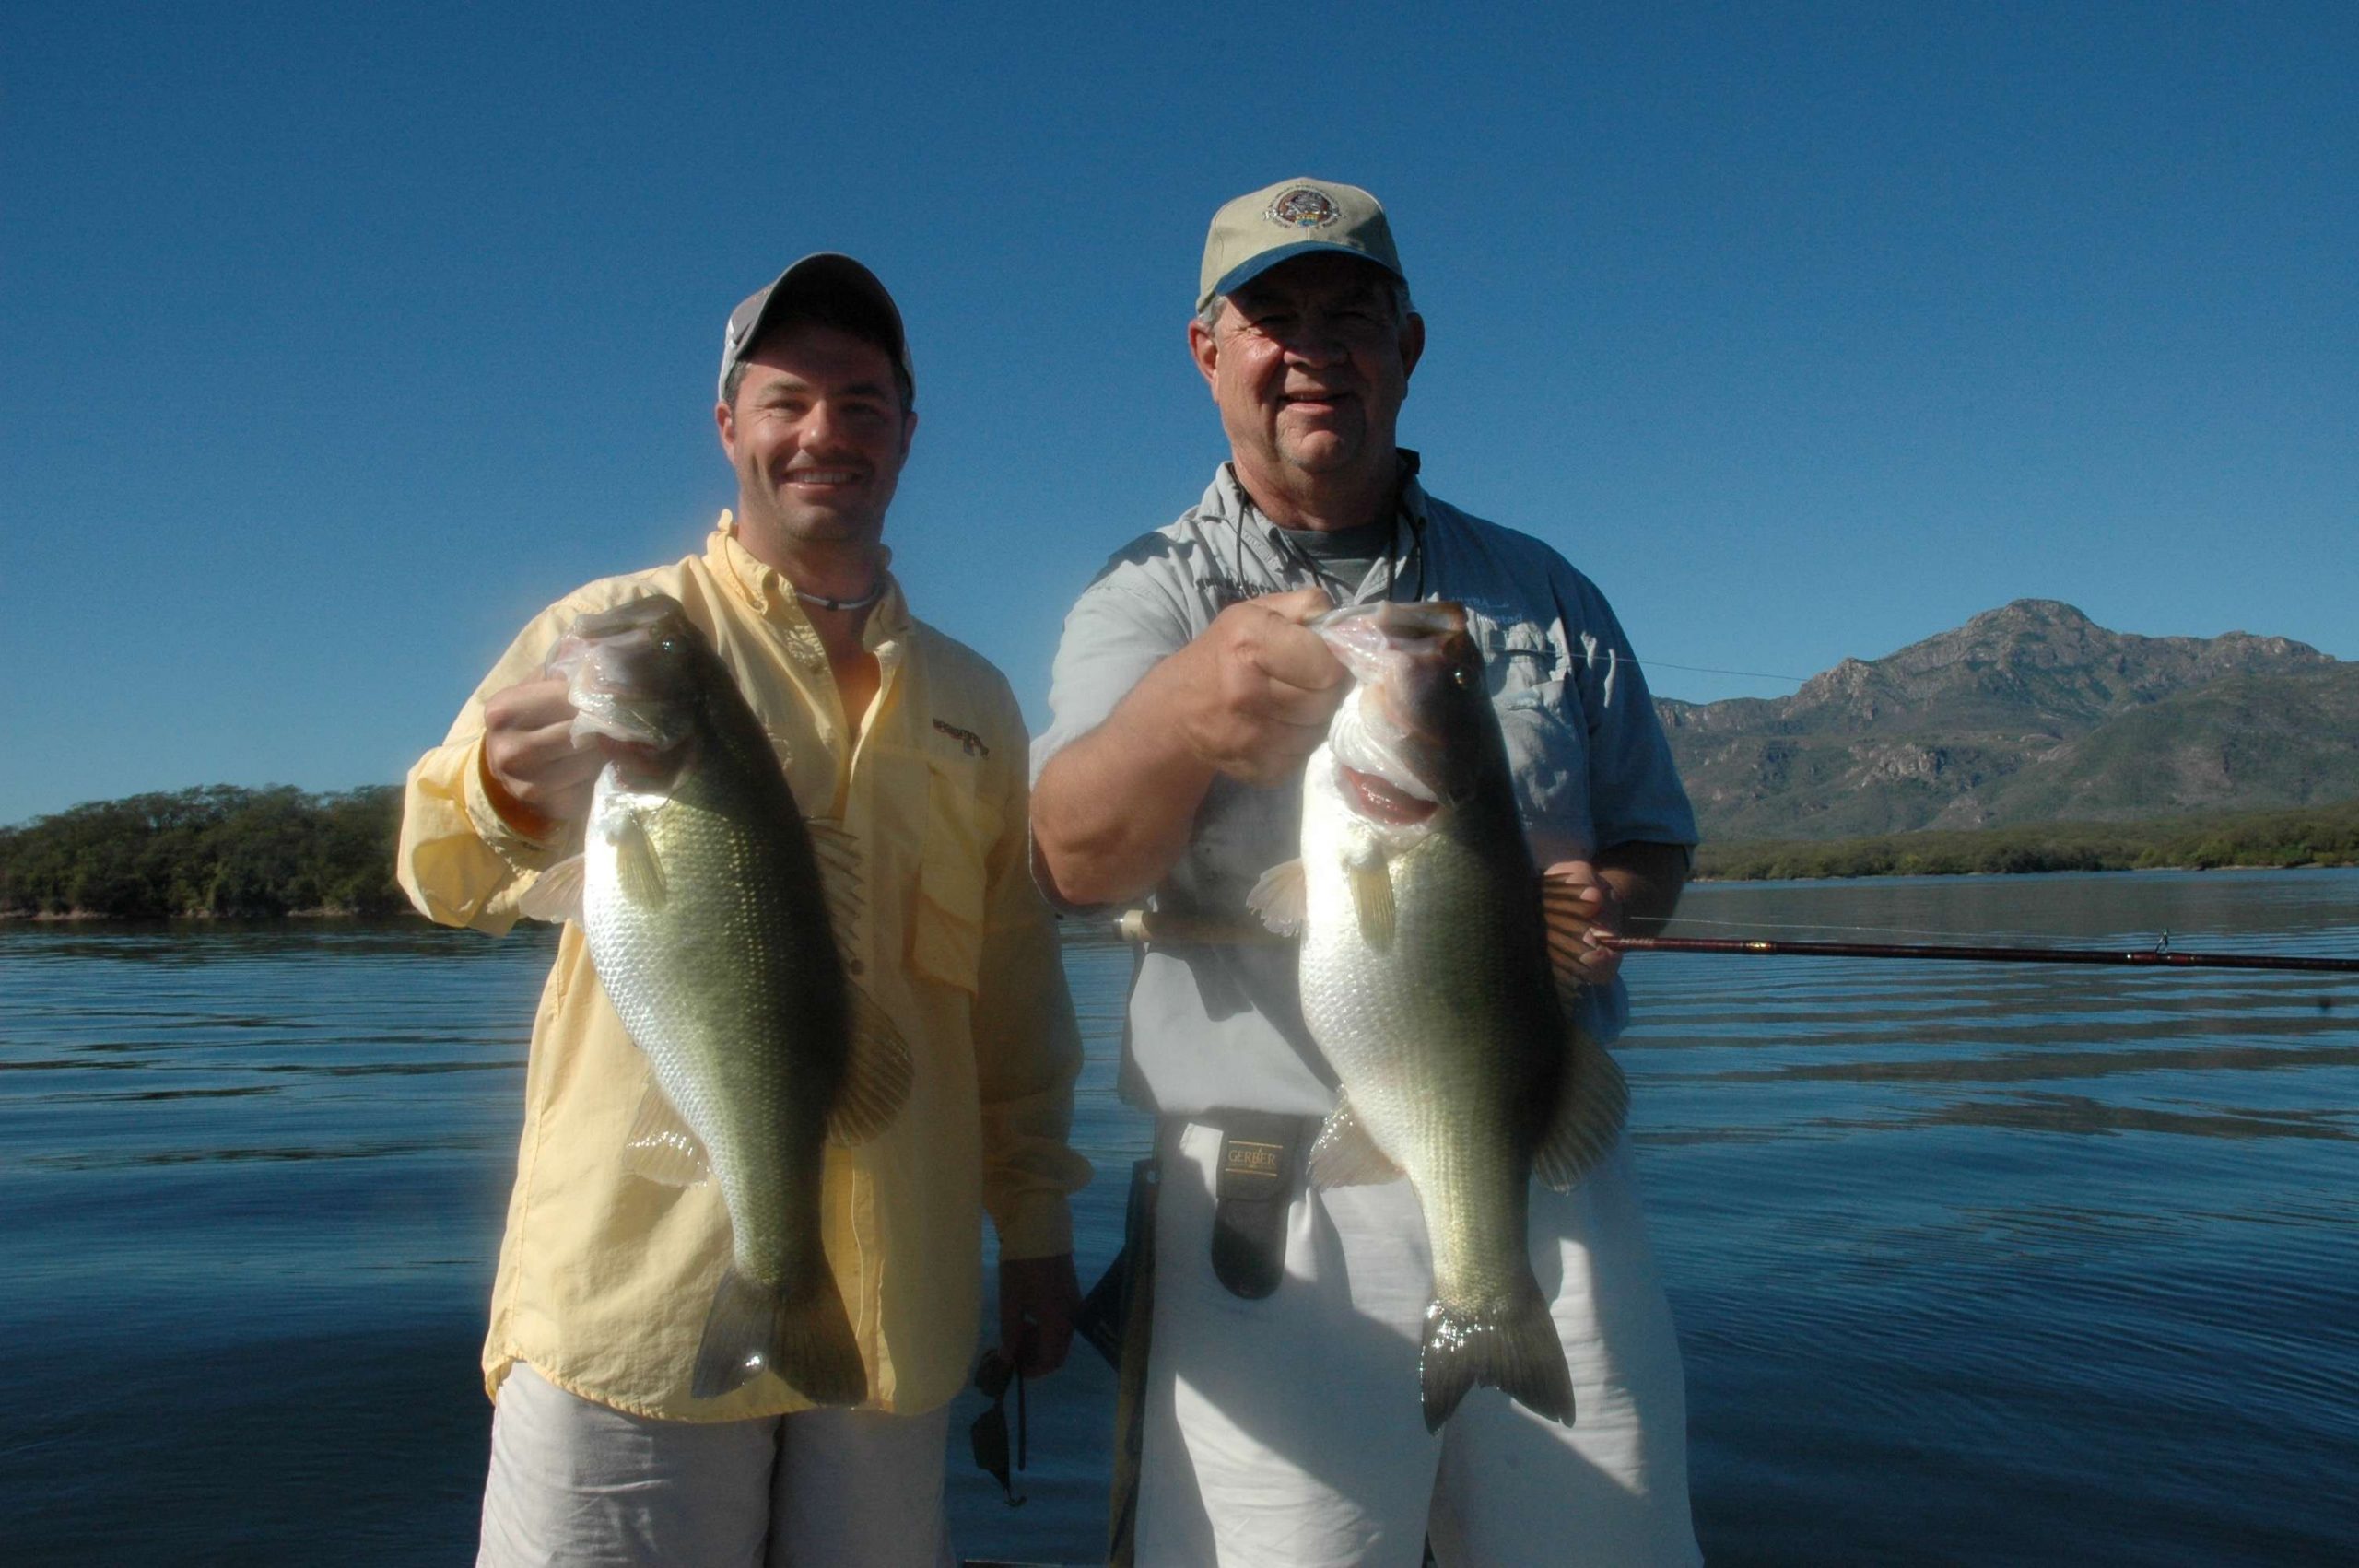 And back to El Salto to research with current Bassmaster editor, James Hall.